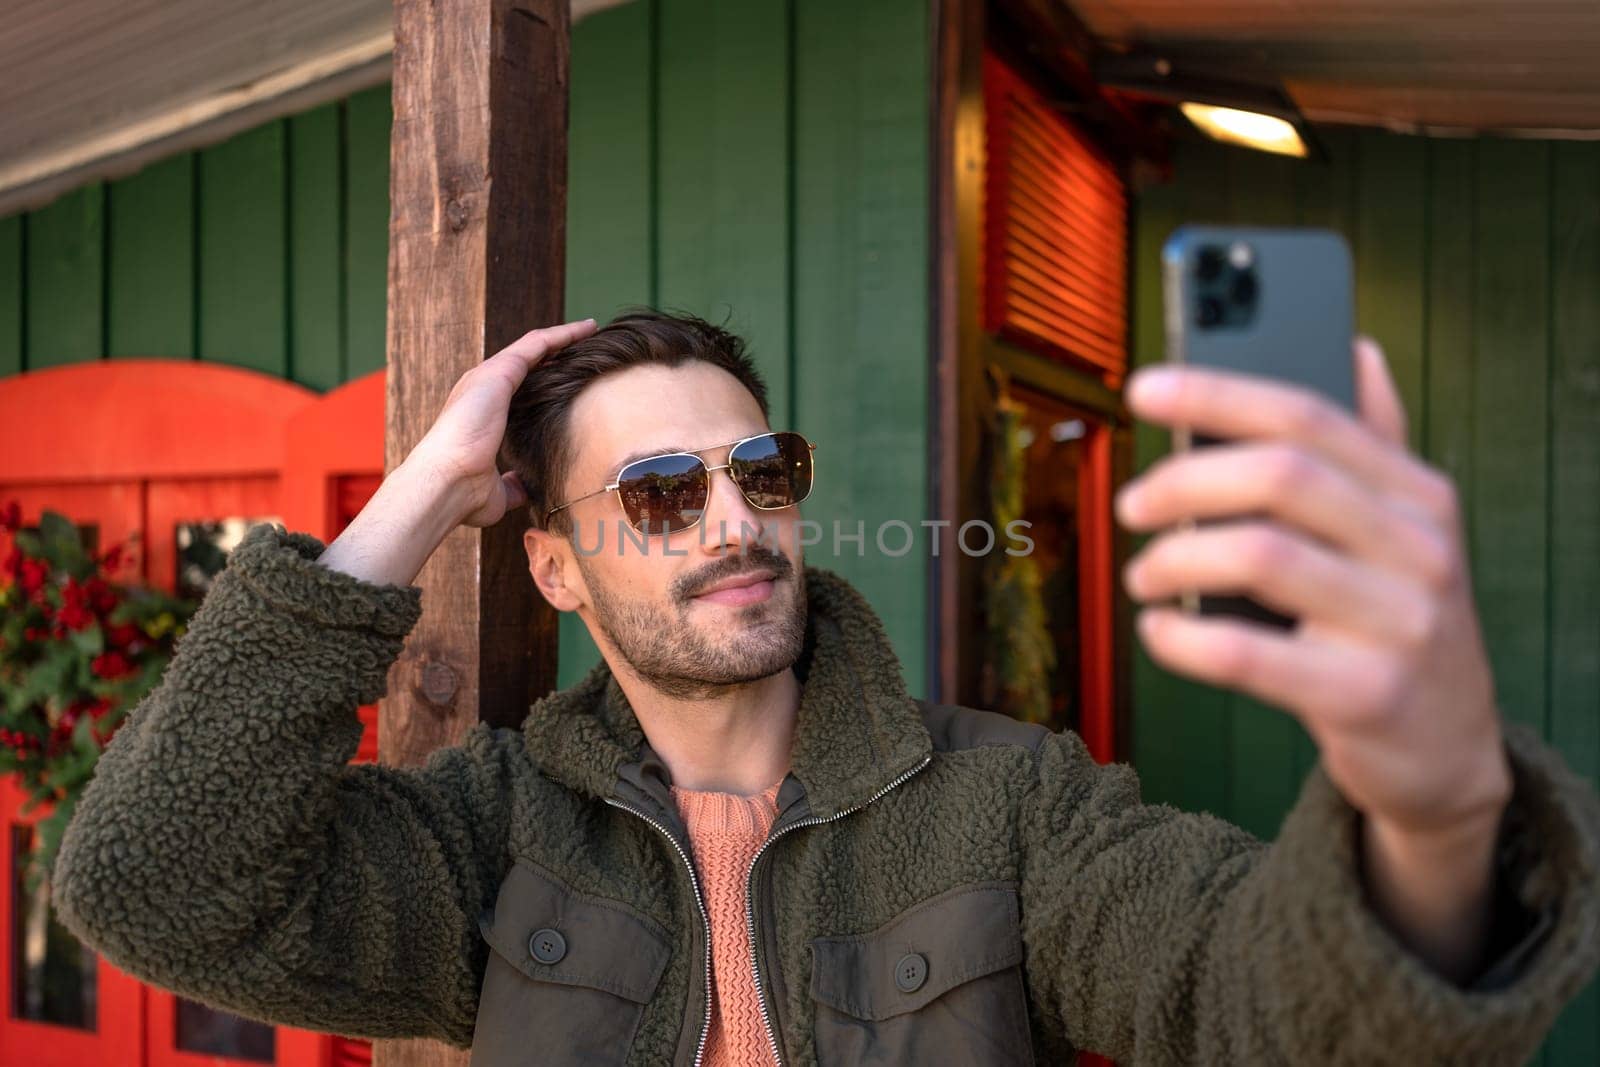 Man taking selfie outdoors. Stylish man wearing sunglasses making photo of himself with cell phone outside wooden house. Side view of handsome guy in fluffy jacket having video chat outdoor